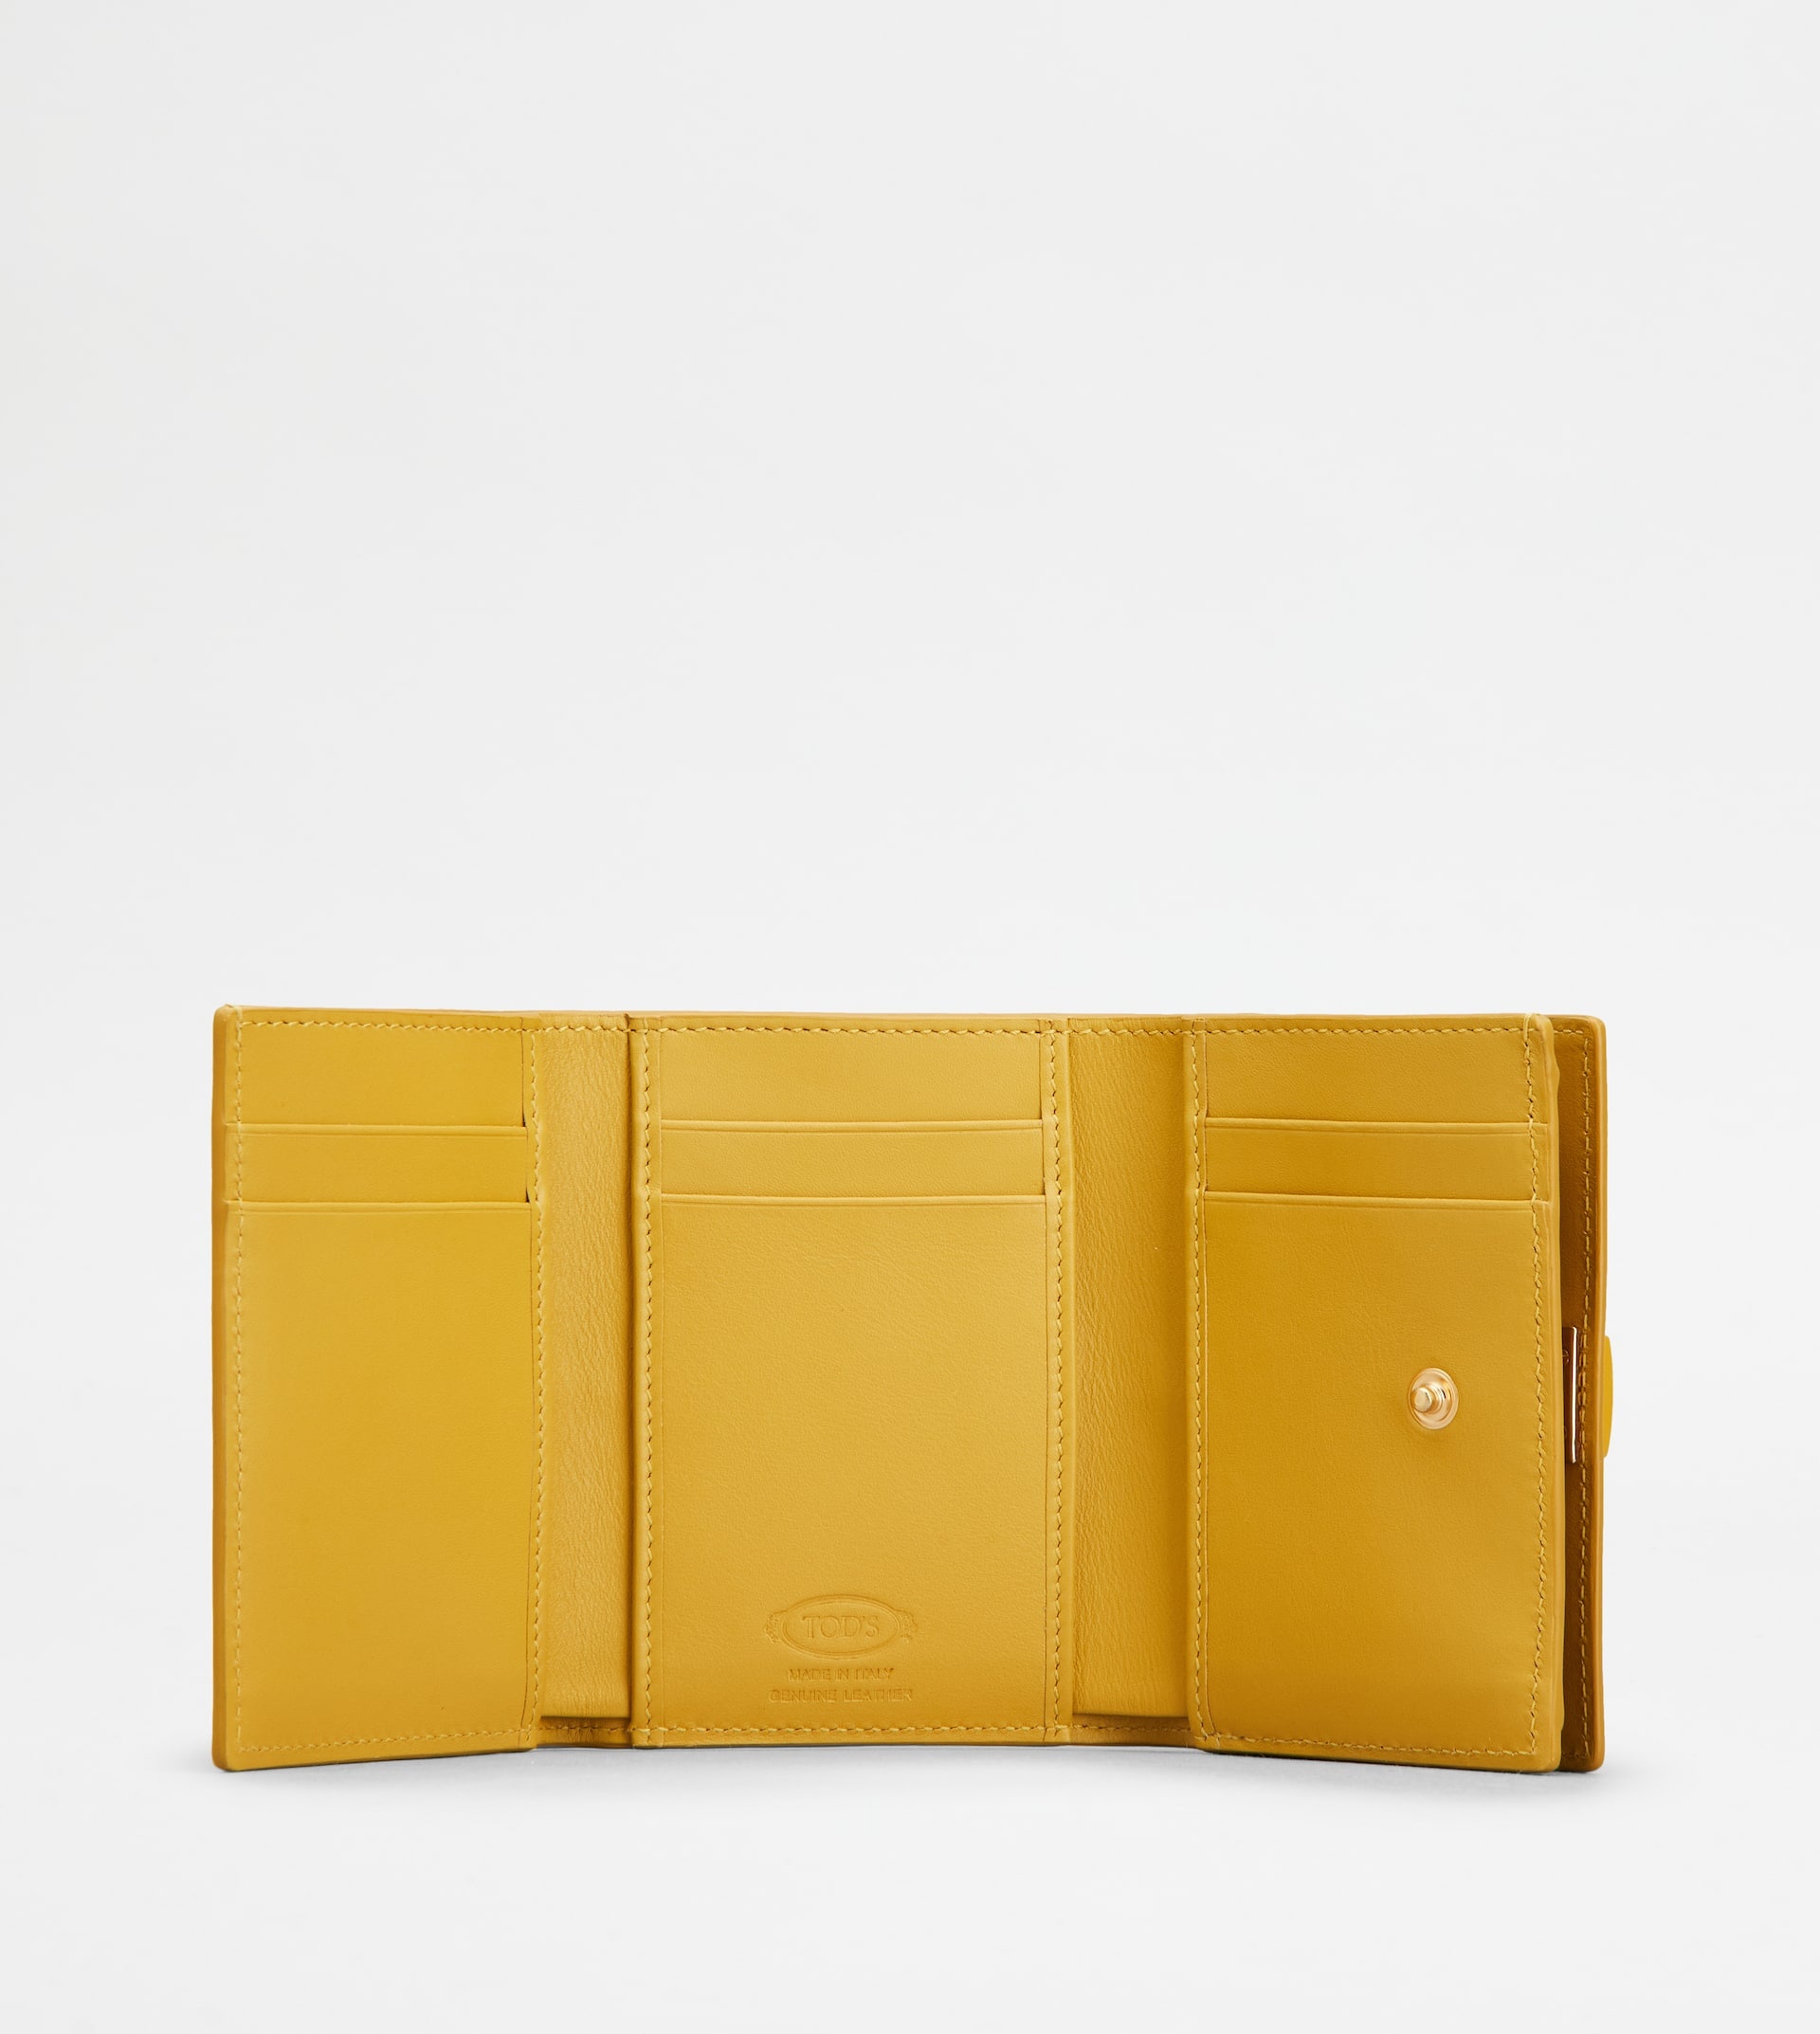 T TIMELESS WALLET IN LEATHER - YELLOW - 2